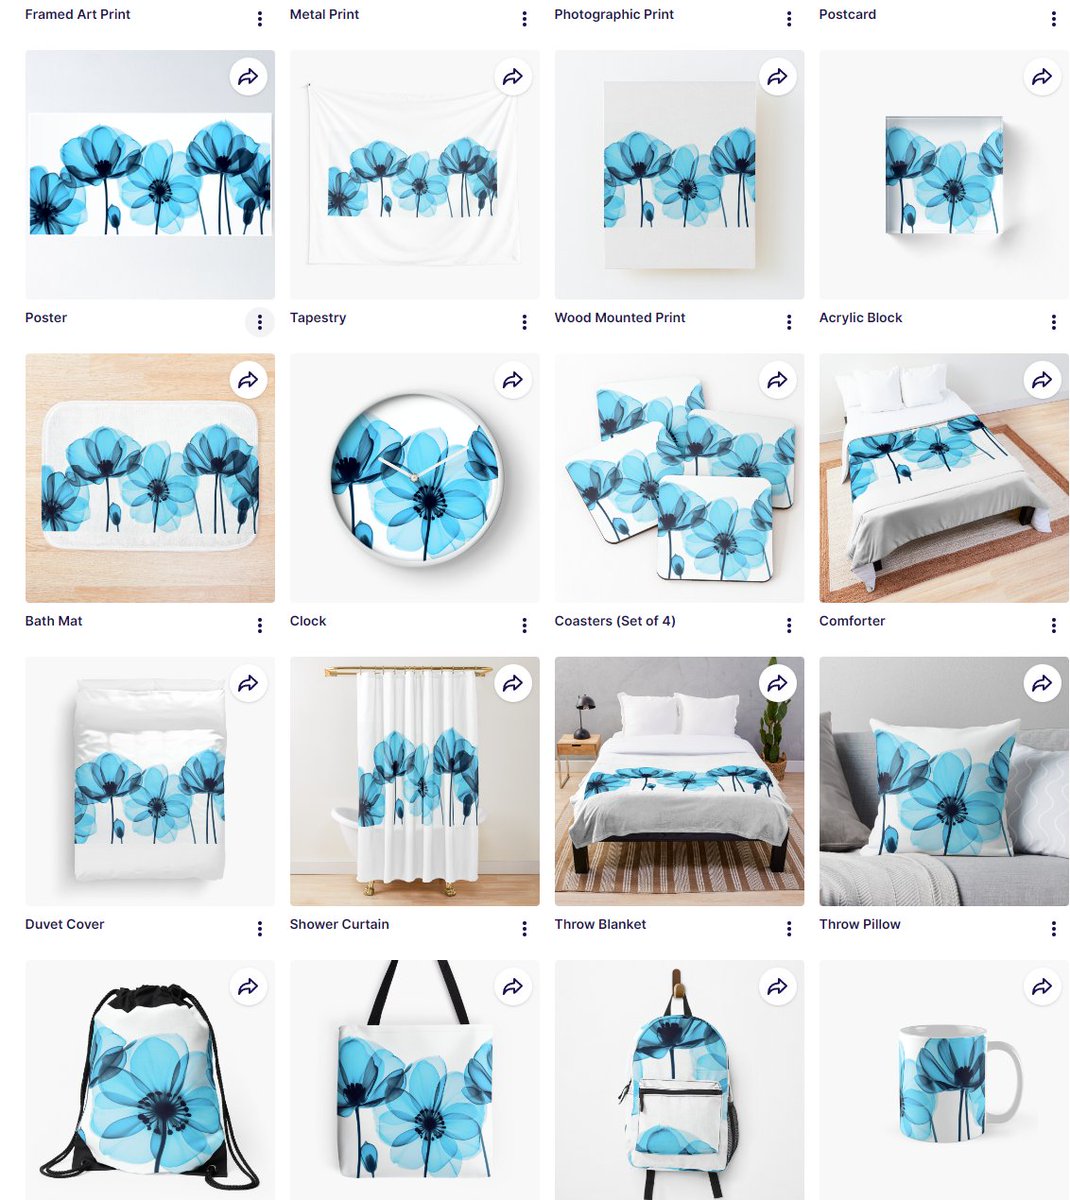 Get my art printed on awesome products. Support me at Redbubble #RBandME:  
redbubble.com/i/throw-pillow…

#redbubble #flowers #decorations #decorationideas #Clocks #showercurtains #Cushions #coffeecups #dogblanket #coasters #comforter #backpacks #wallart